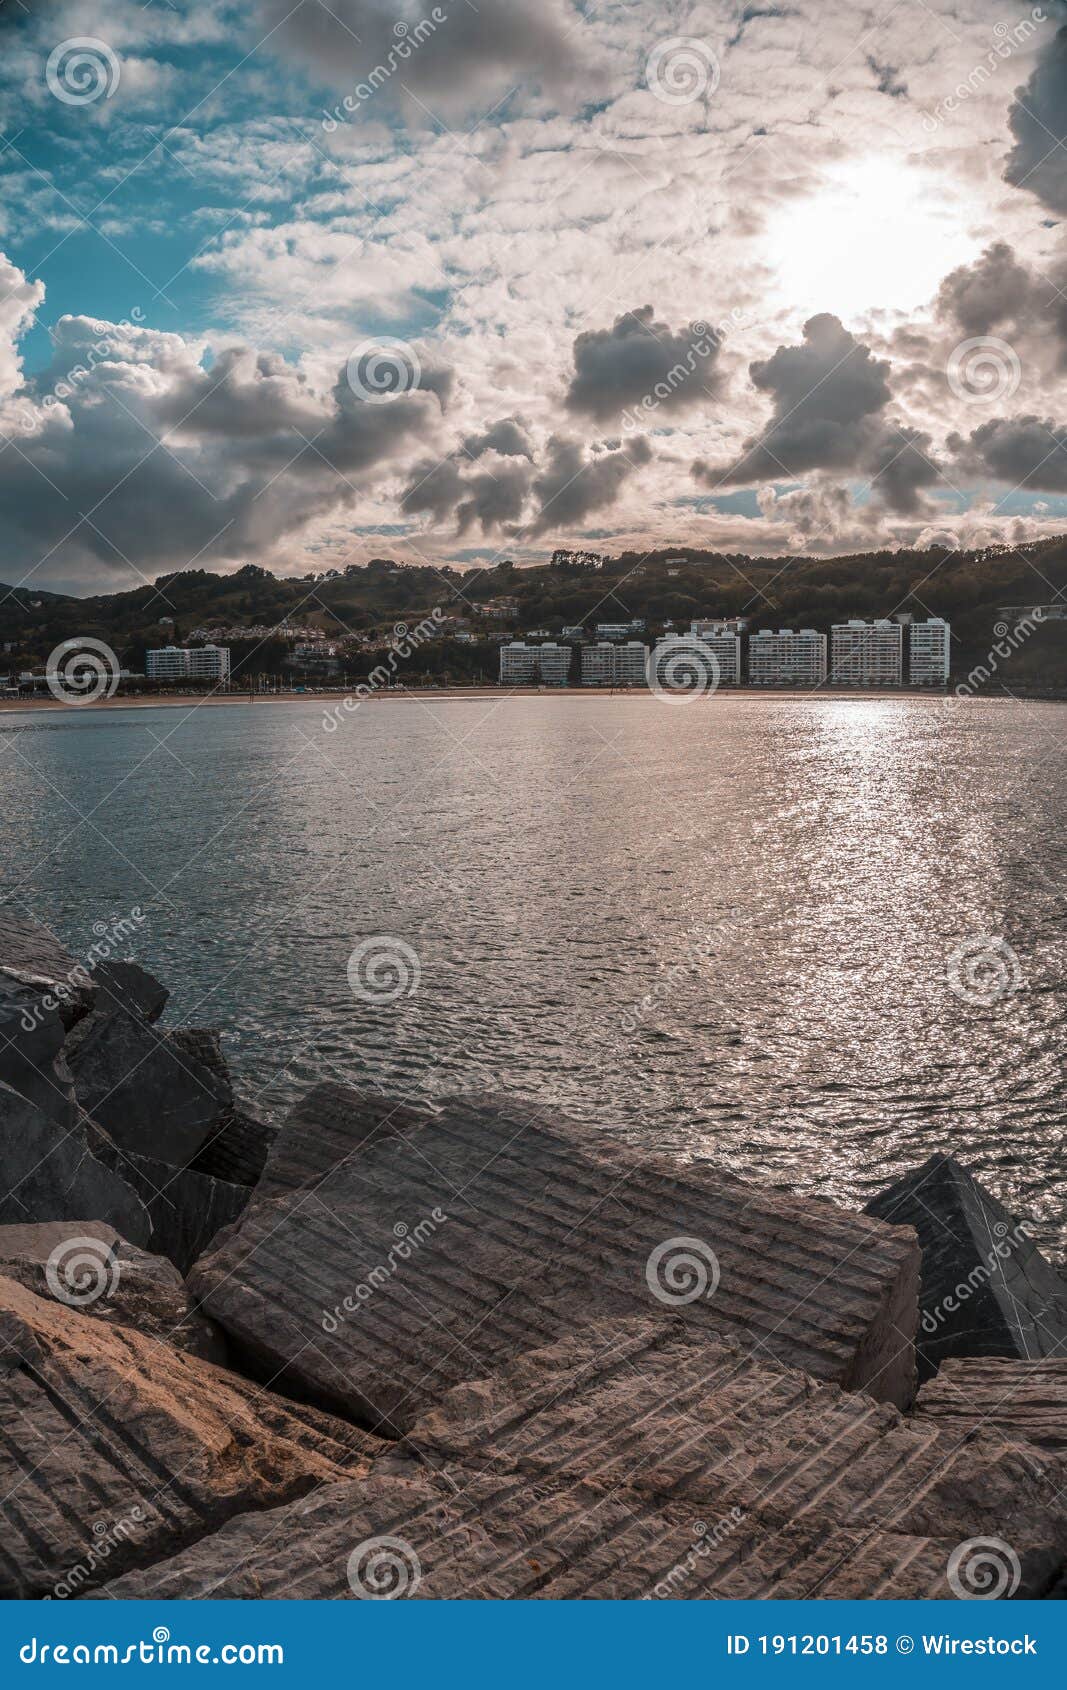 vertical shot of the town of fuenterrabia on the body of the sea in the basque country, spain